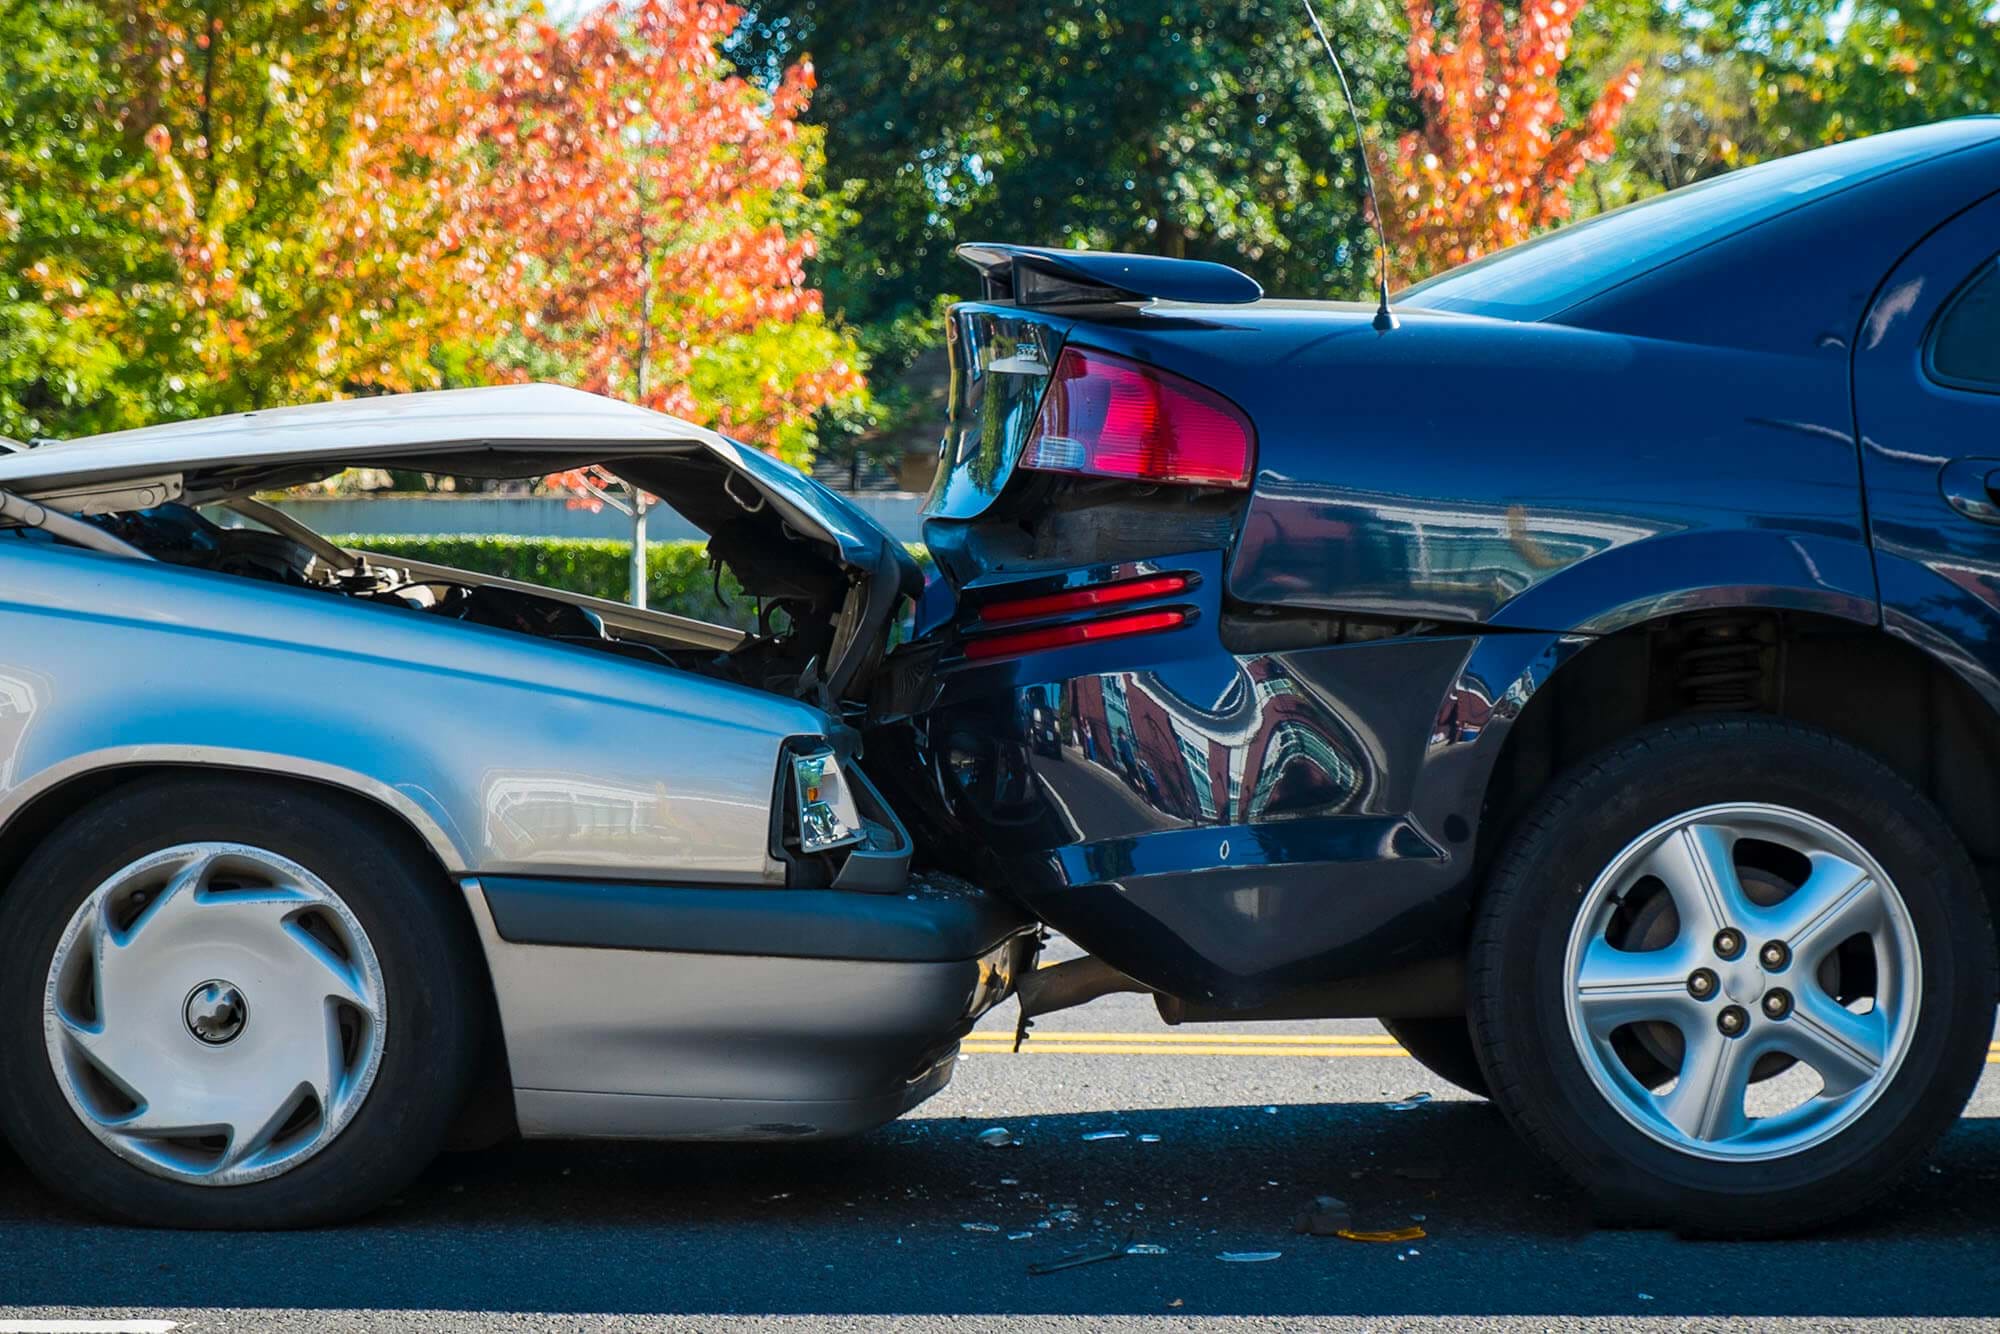 Personal injury compensation claims for passengers injured in road accidents